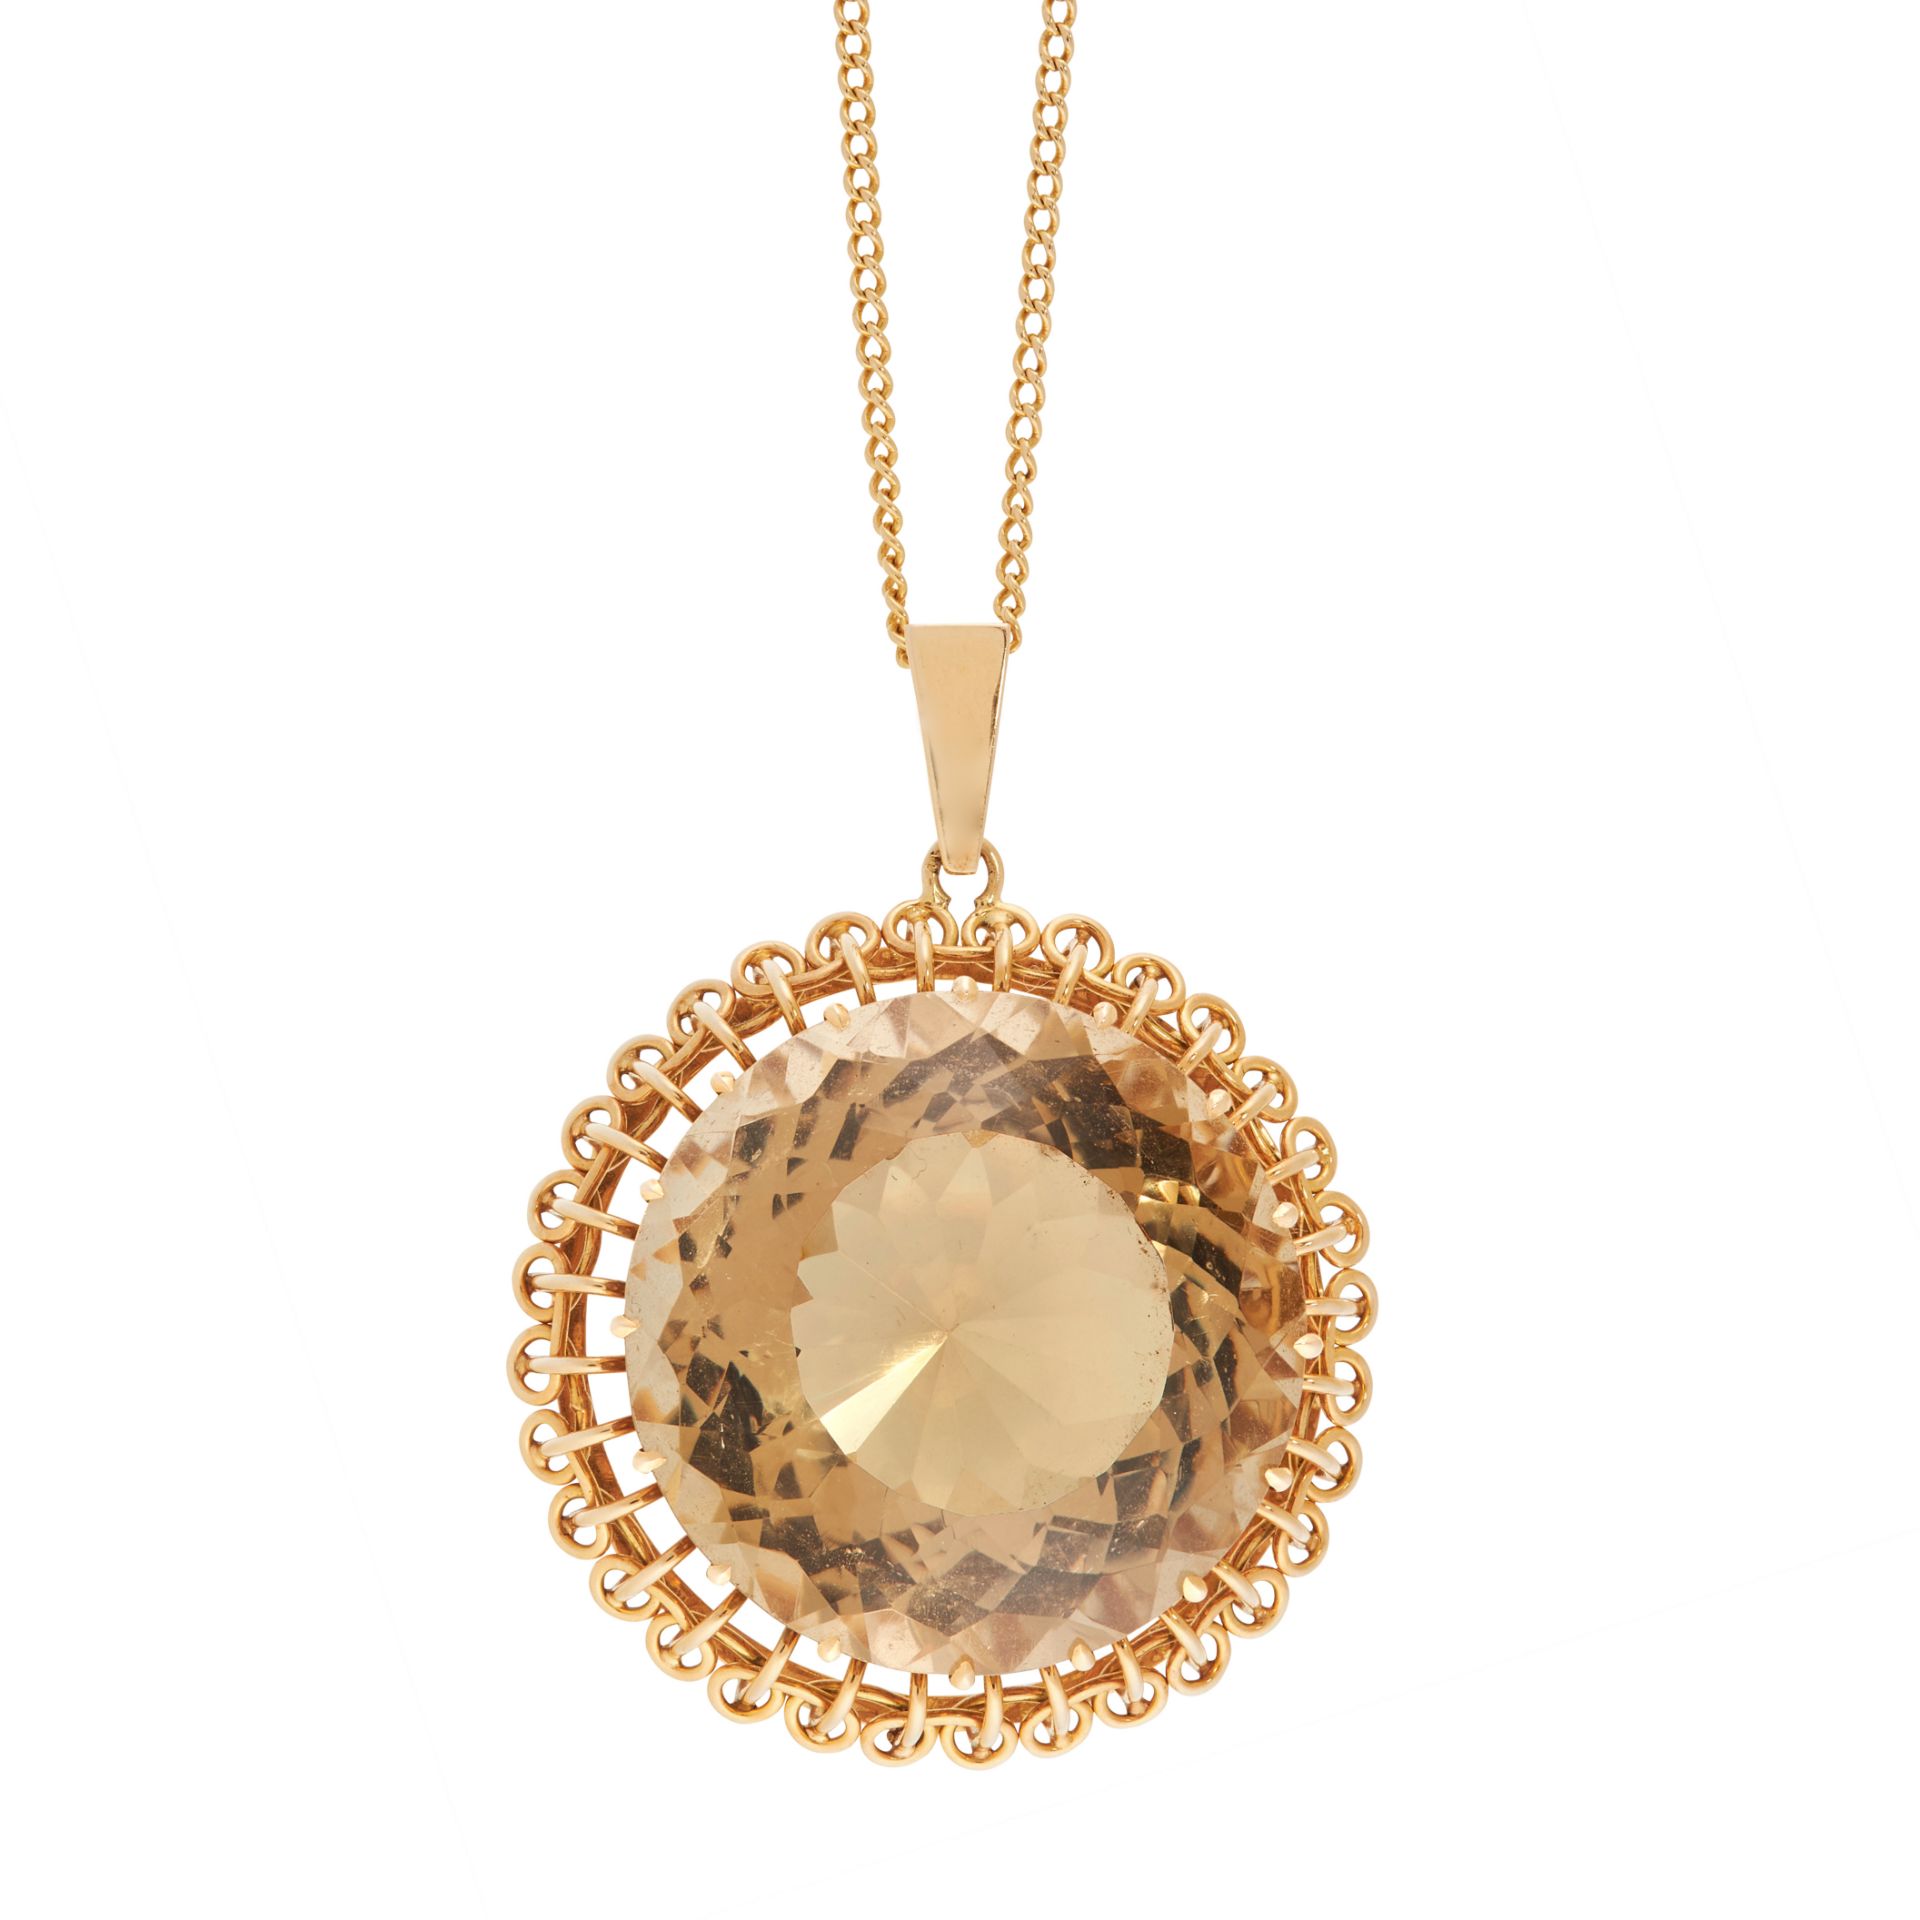 A VINTAGE CITRINE PENDANT AND CHAIN in 18ct yellow gold, set with a round cut citrine of 120.57